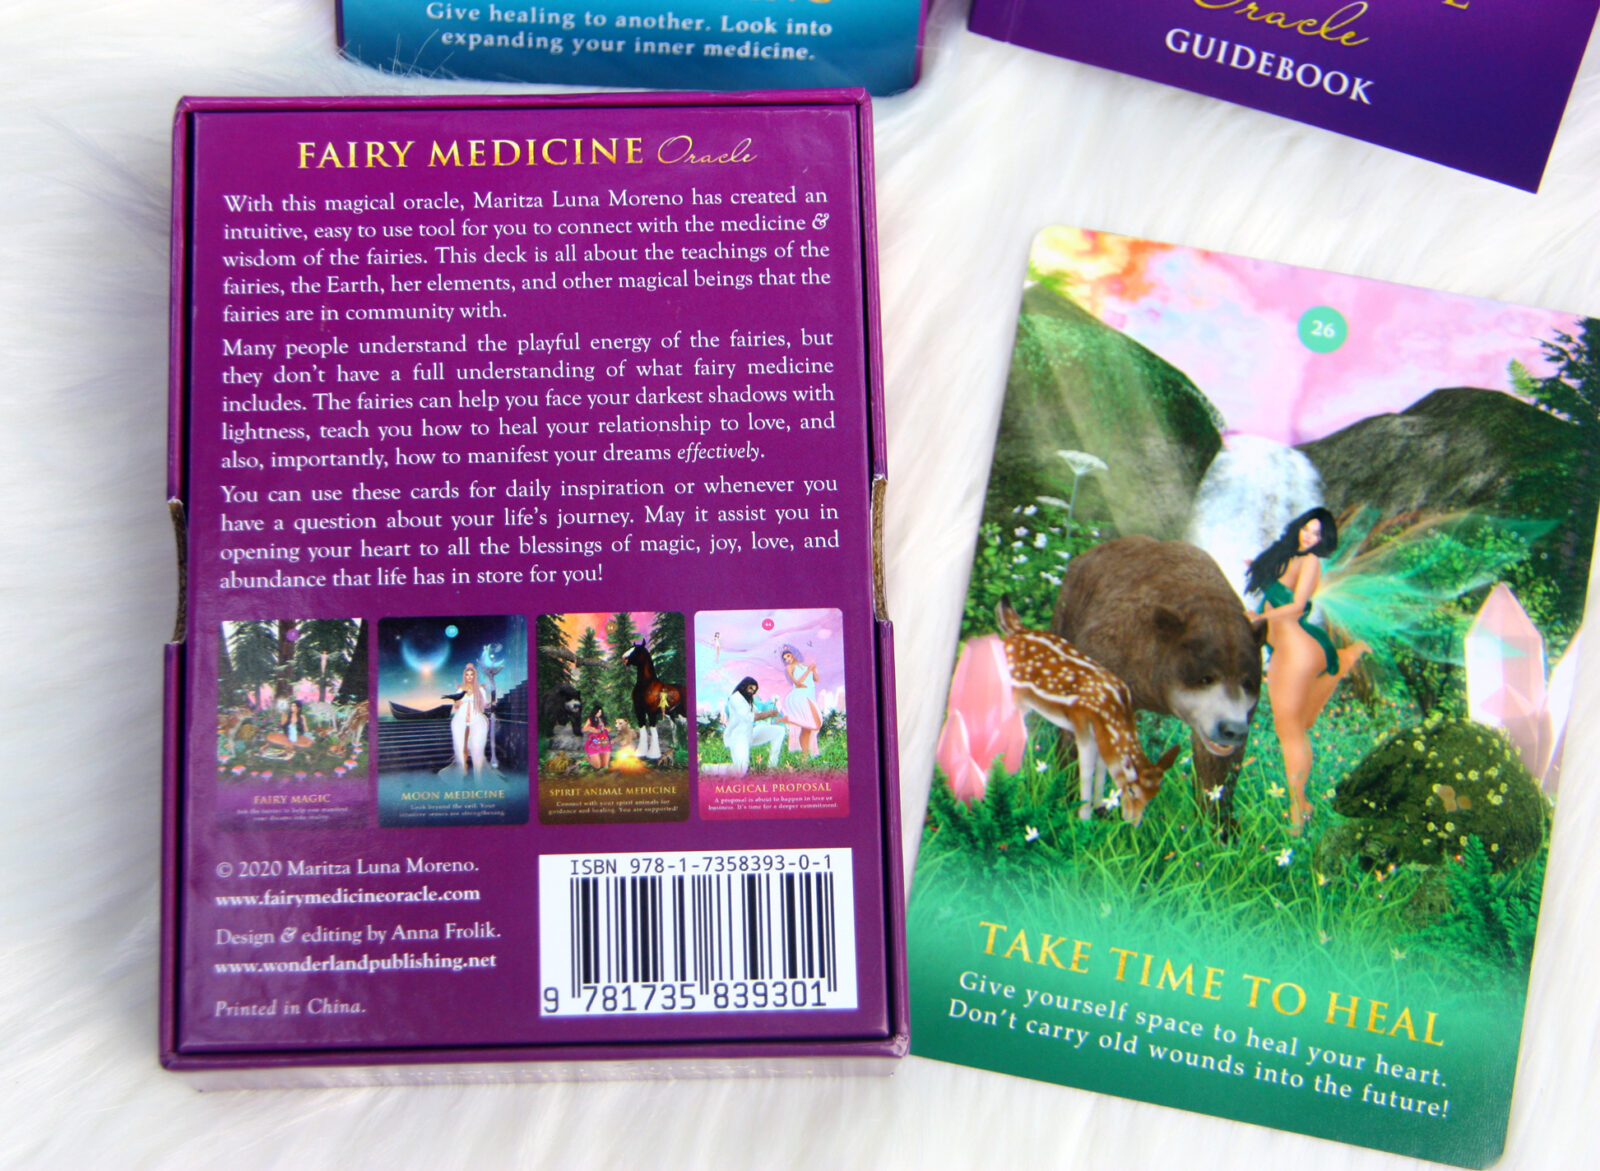 Fairy Medicine Oracle by Maritza Luna Moreno with an ISBN barcode for retail distribution to Amazon and other retailers.